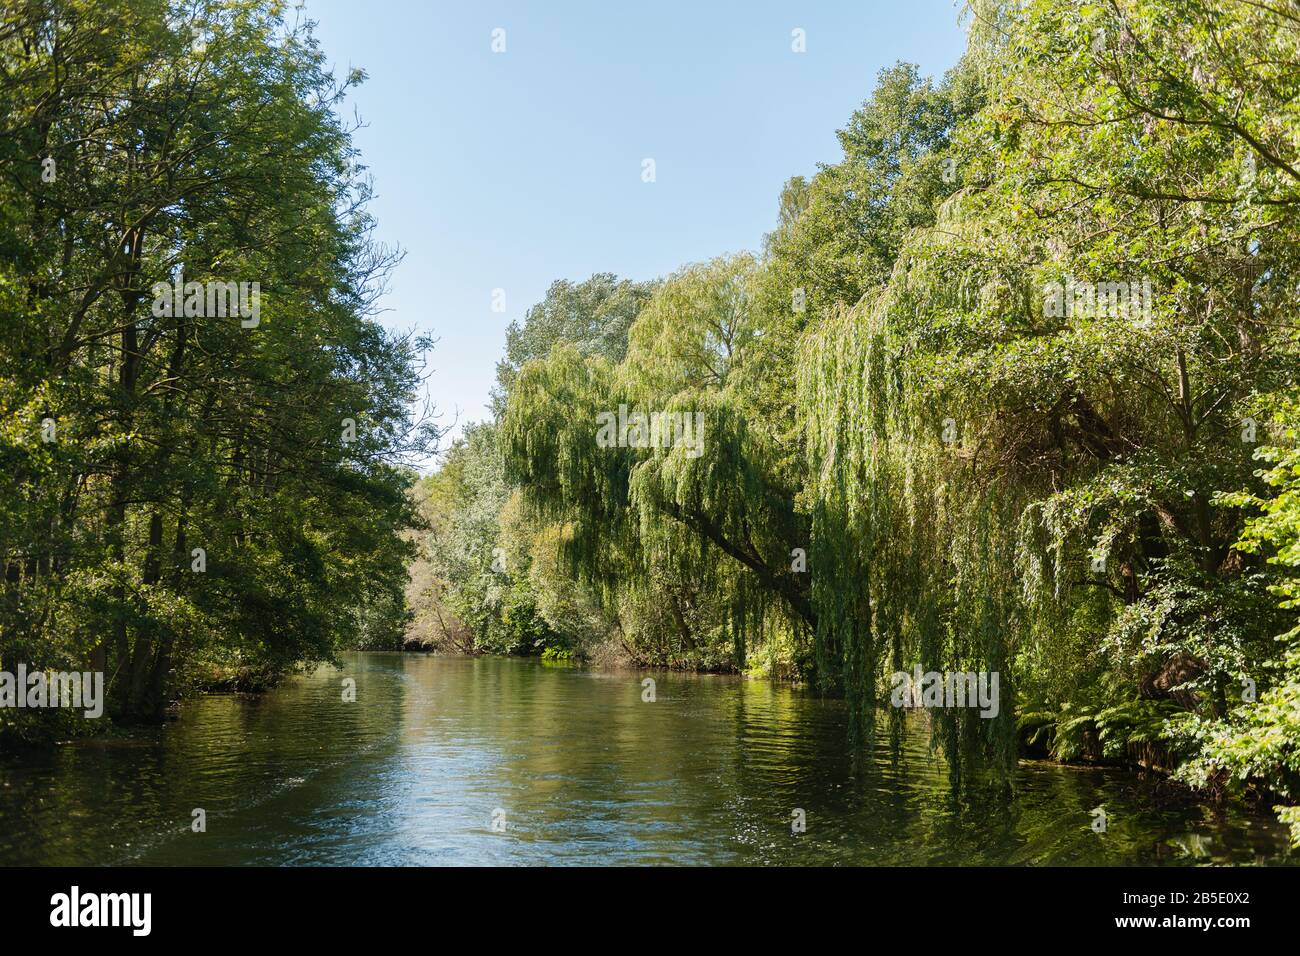 River Wakenitz, connecting Lake Ratzeburg with Lübeck, Baltic Sea, county of Lauenburg, Schleswig-Holstein, North Germany, Central  Europe Stock Photo